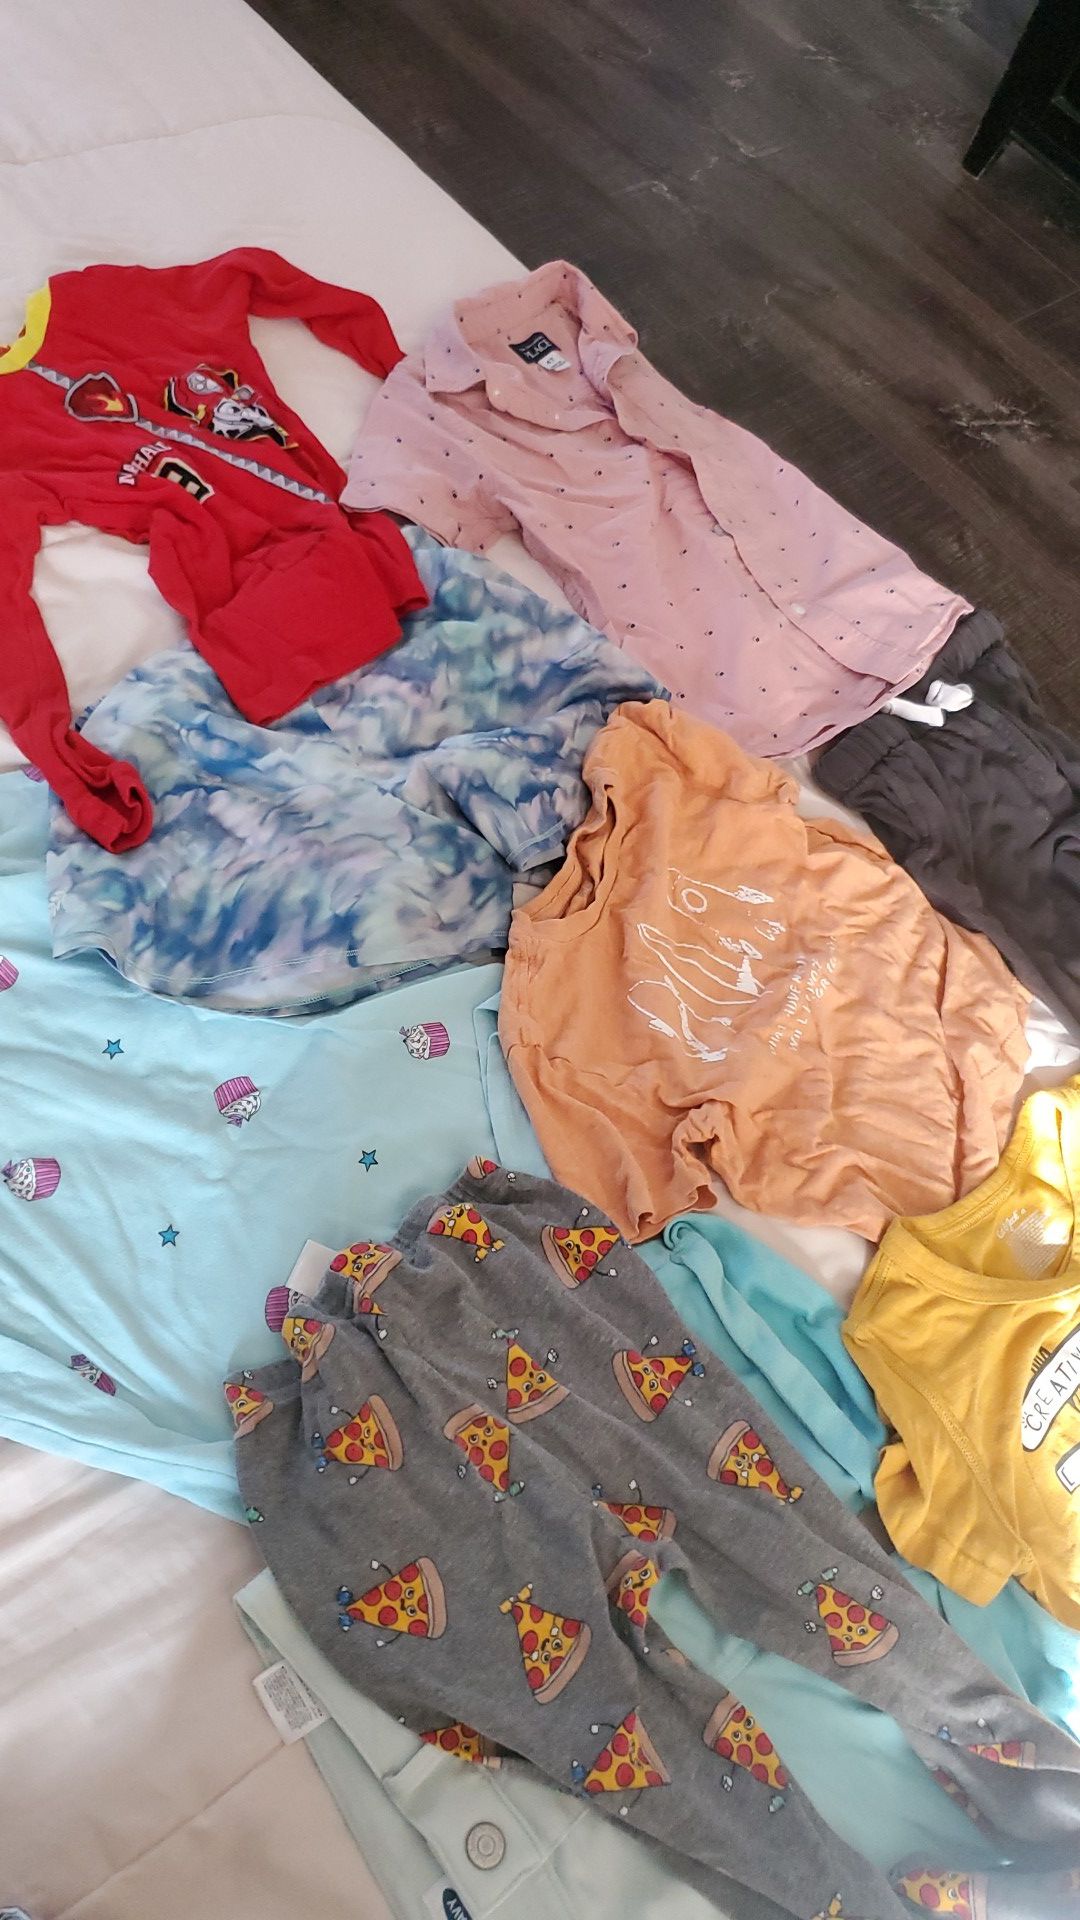 Kids clothes mostly girl size 3t 4t 10-12 mixed